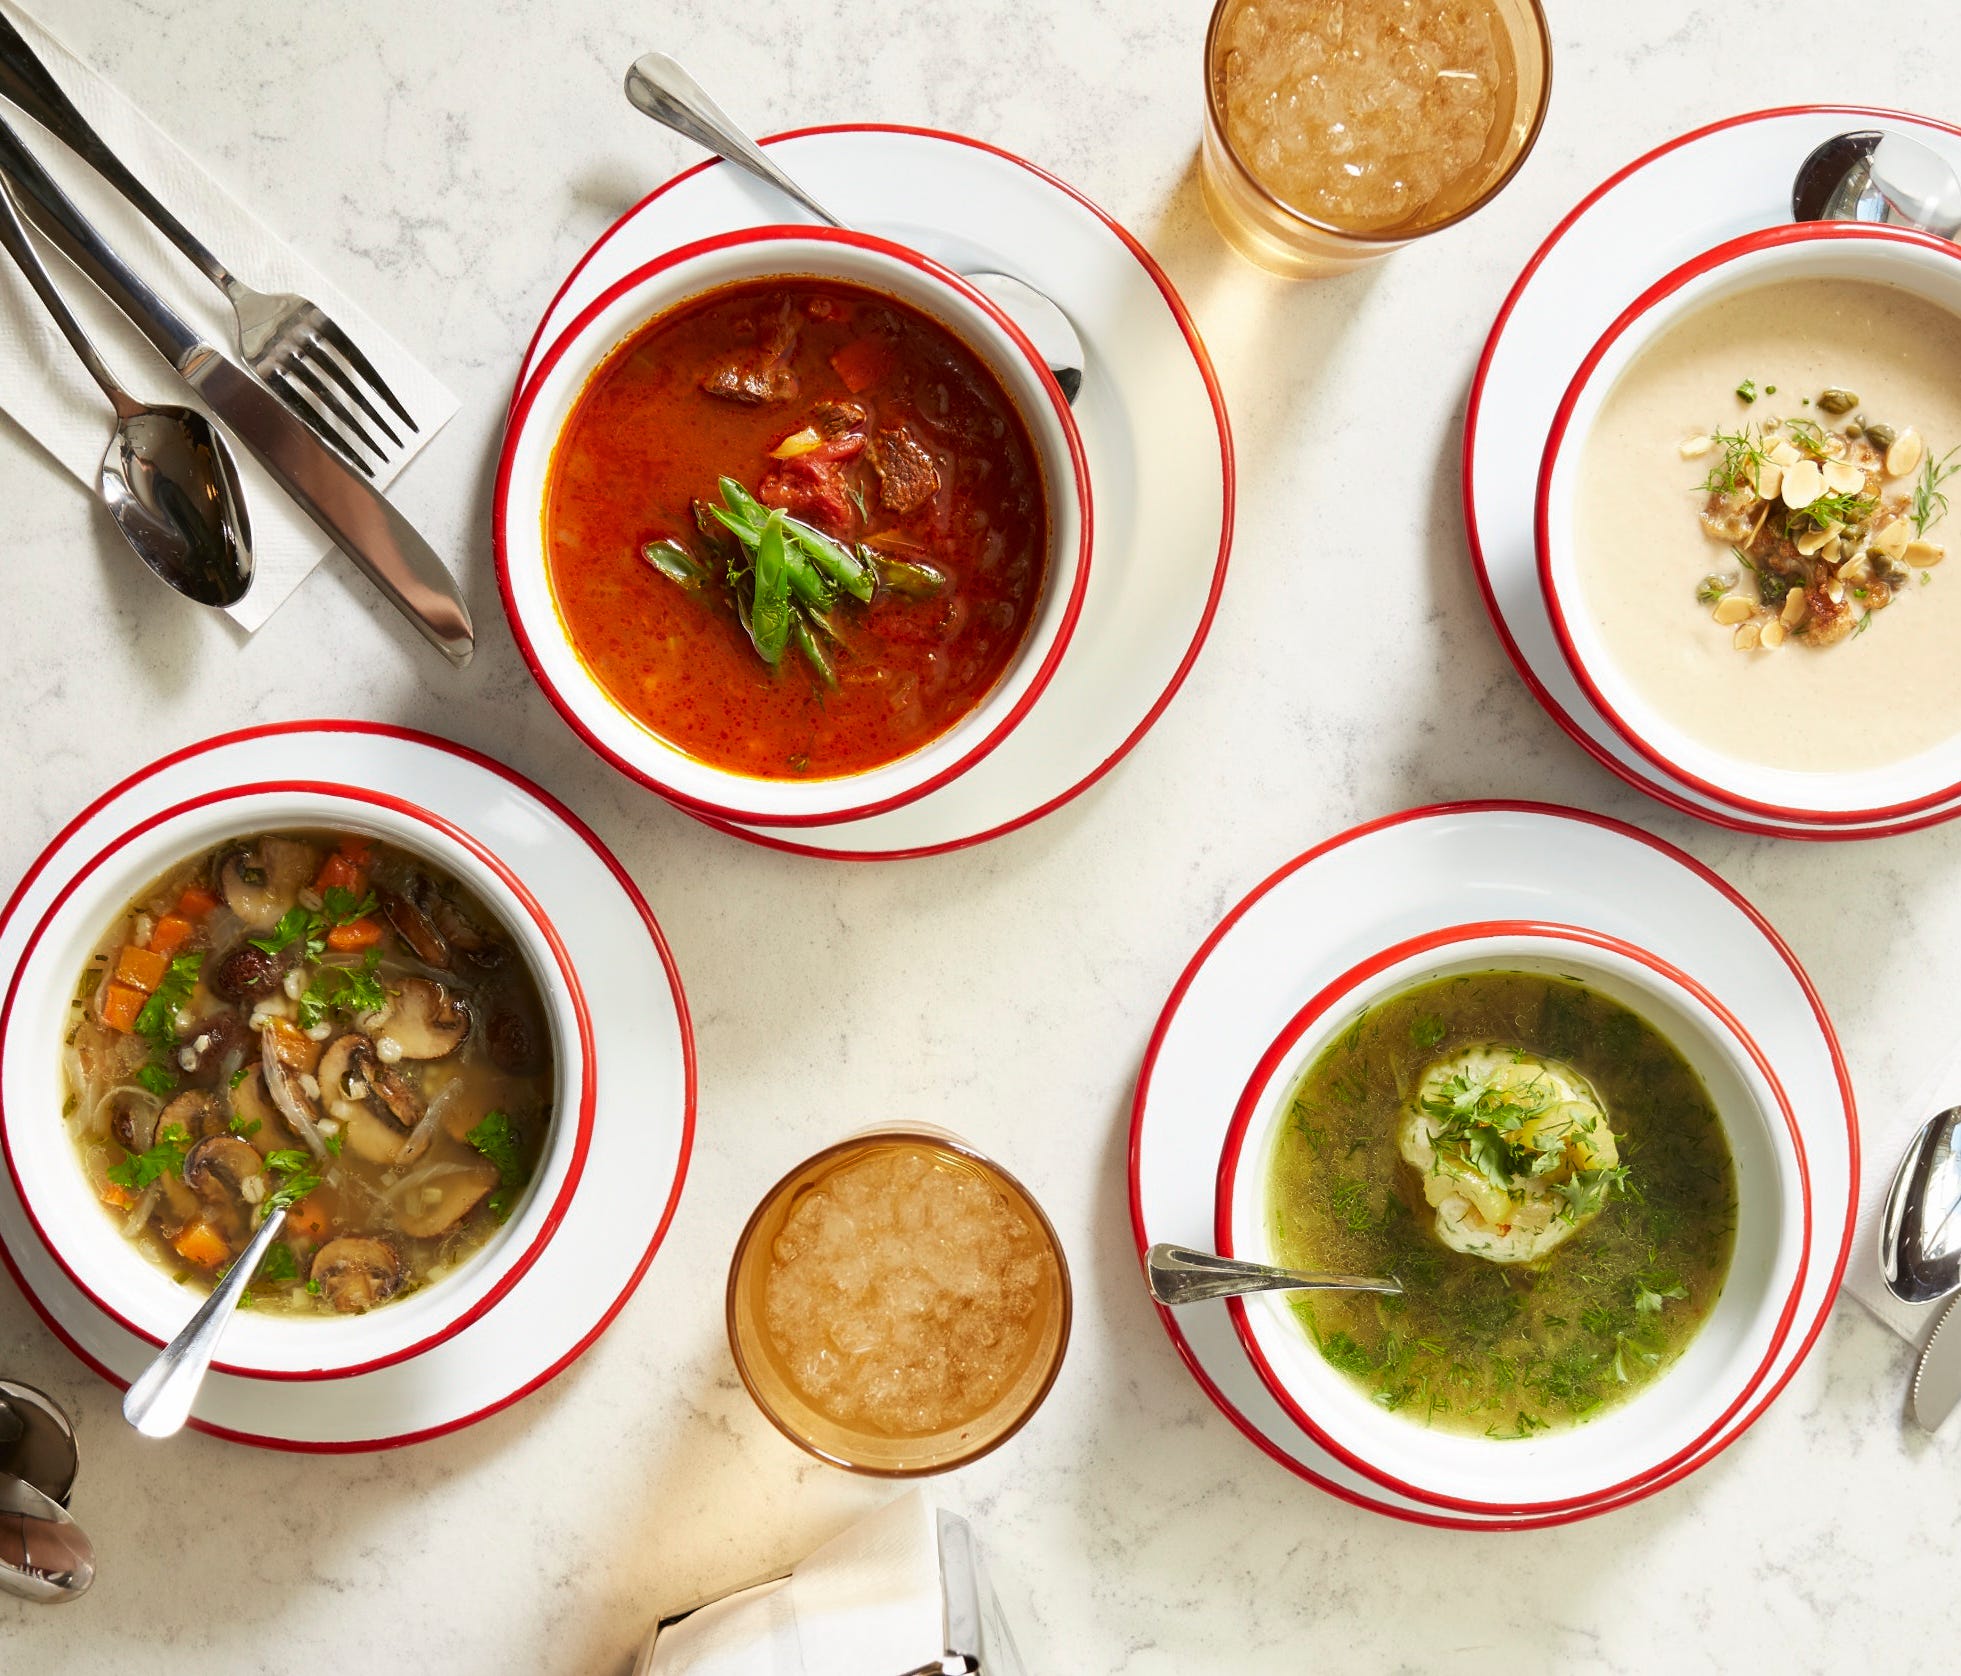 The menu at Rooster Soup Co. includes such choices as (from left to right) mushroom barley, beef and vegetable, smoked matzo ball and roasted cauliflower soups.